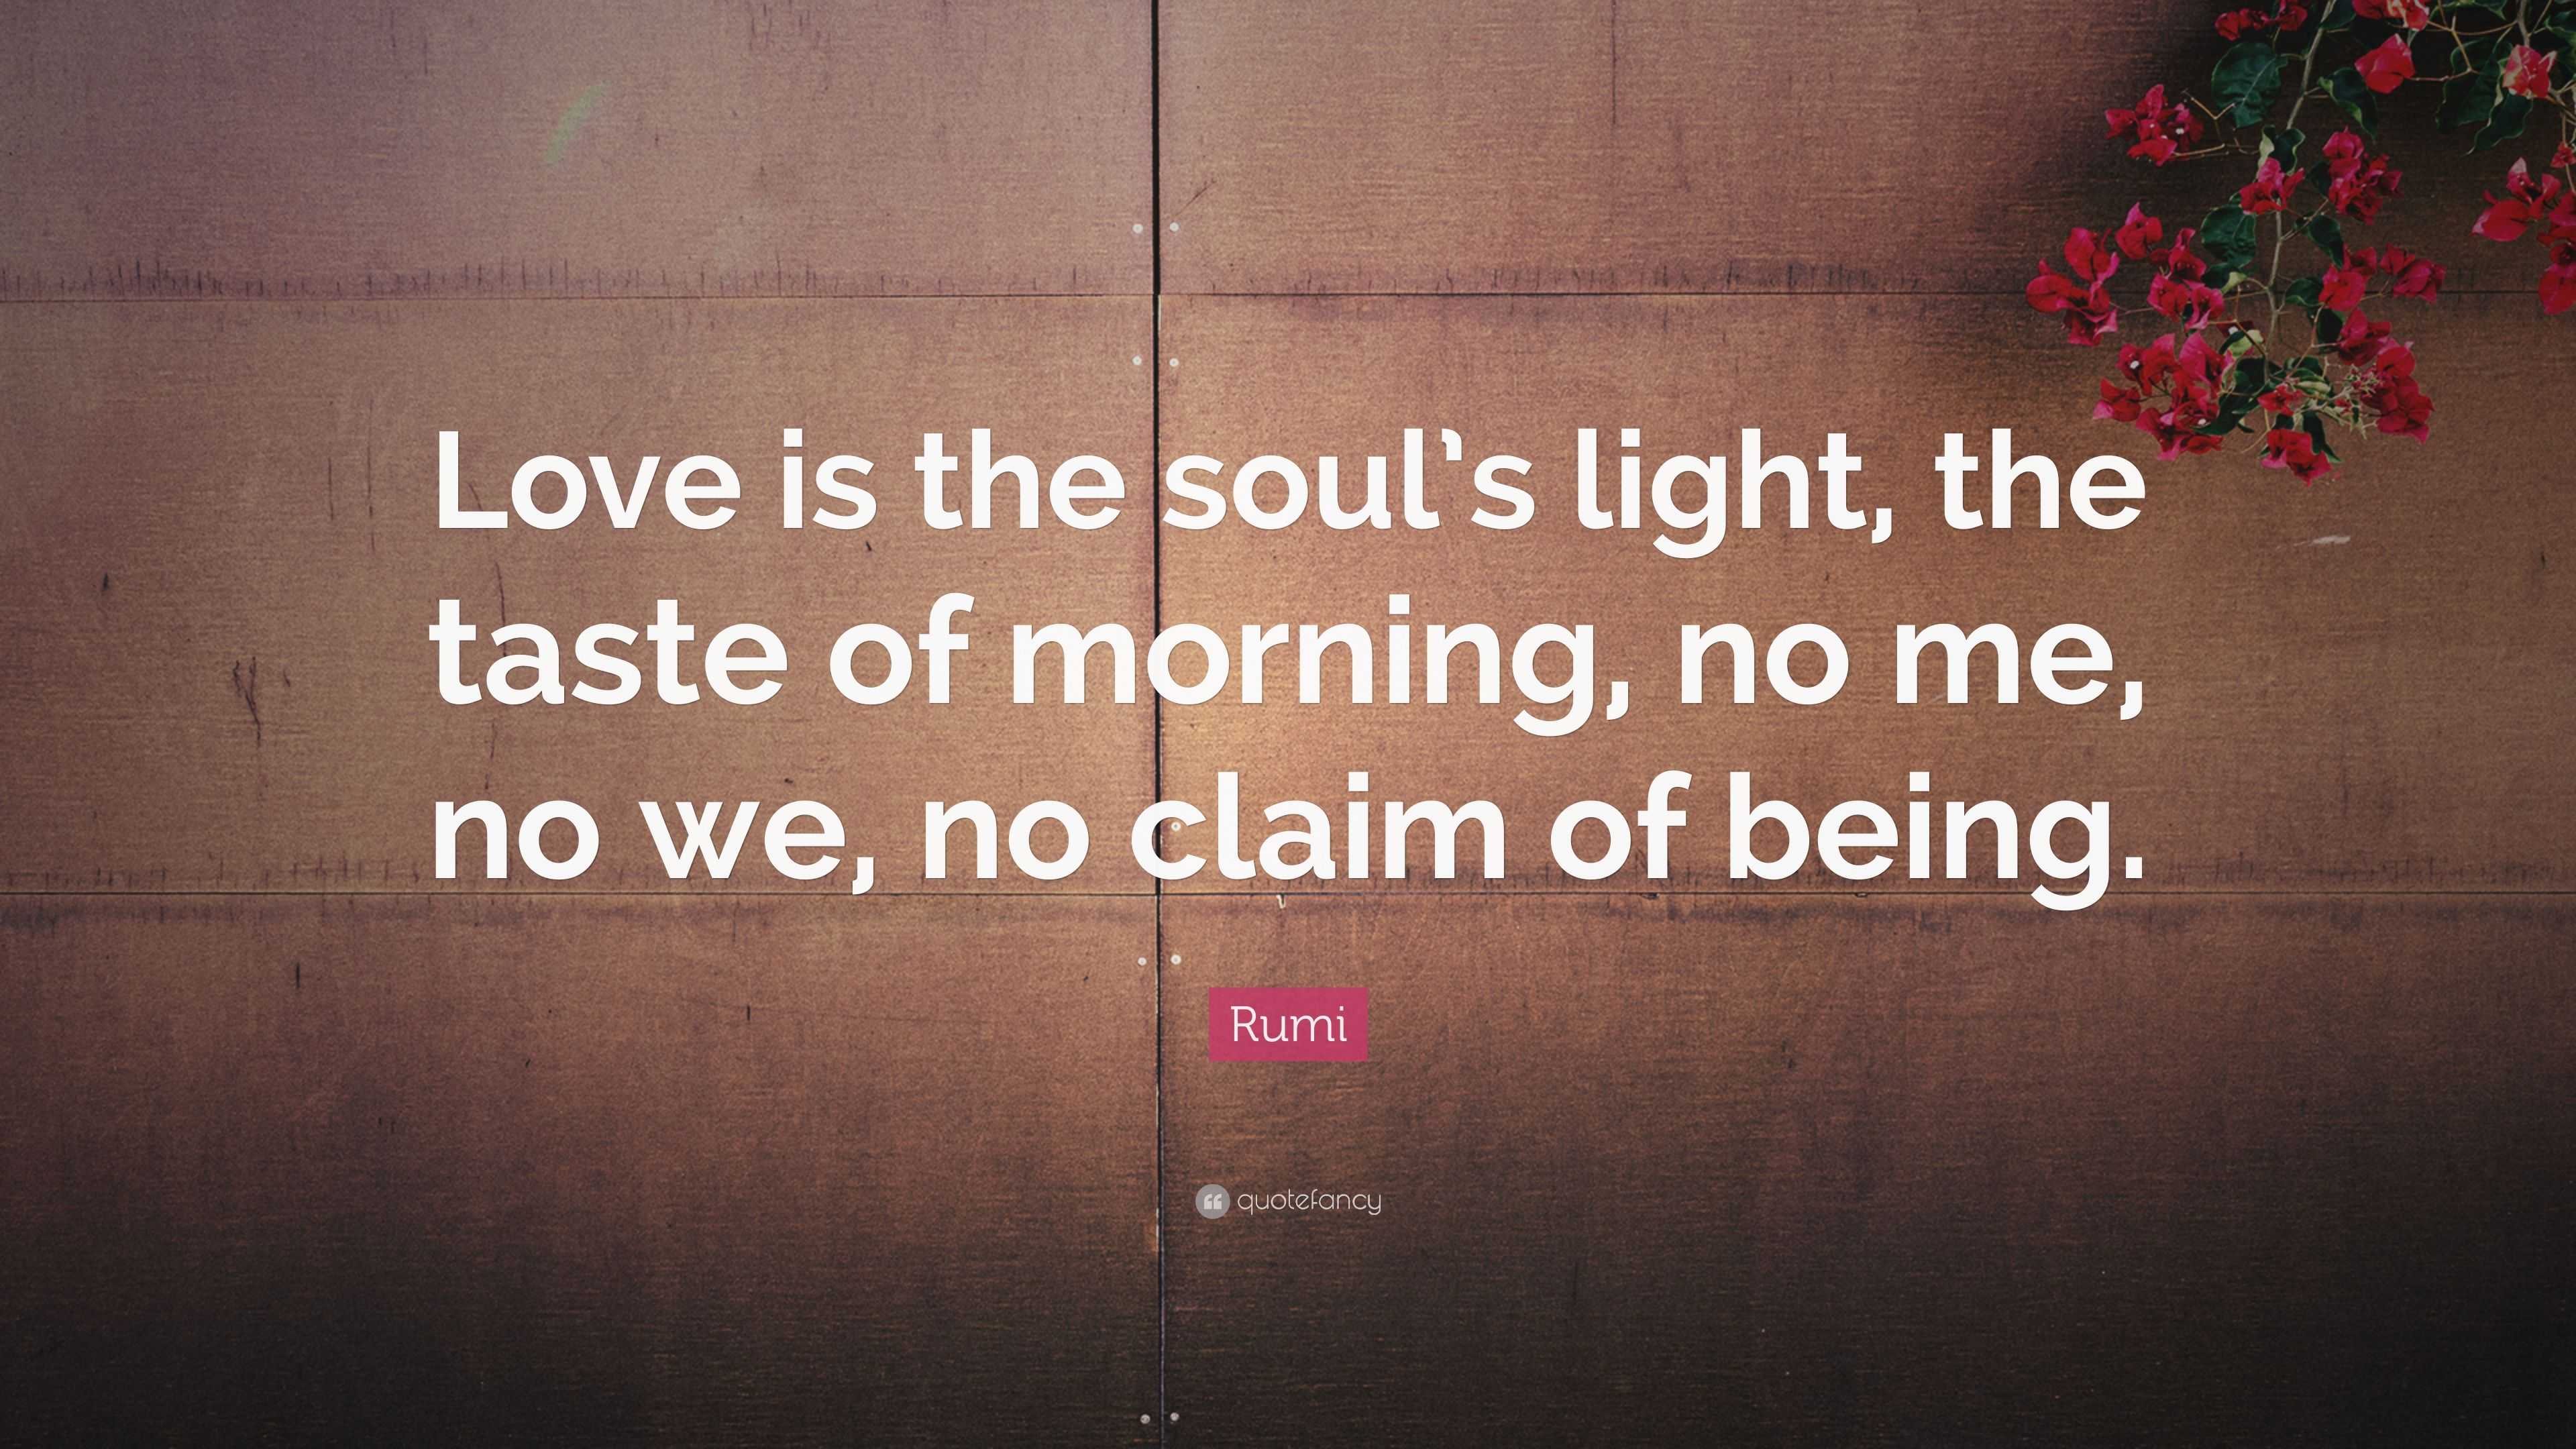 Rumi Quote “Love is the soul’s light, the taste of